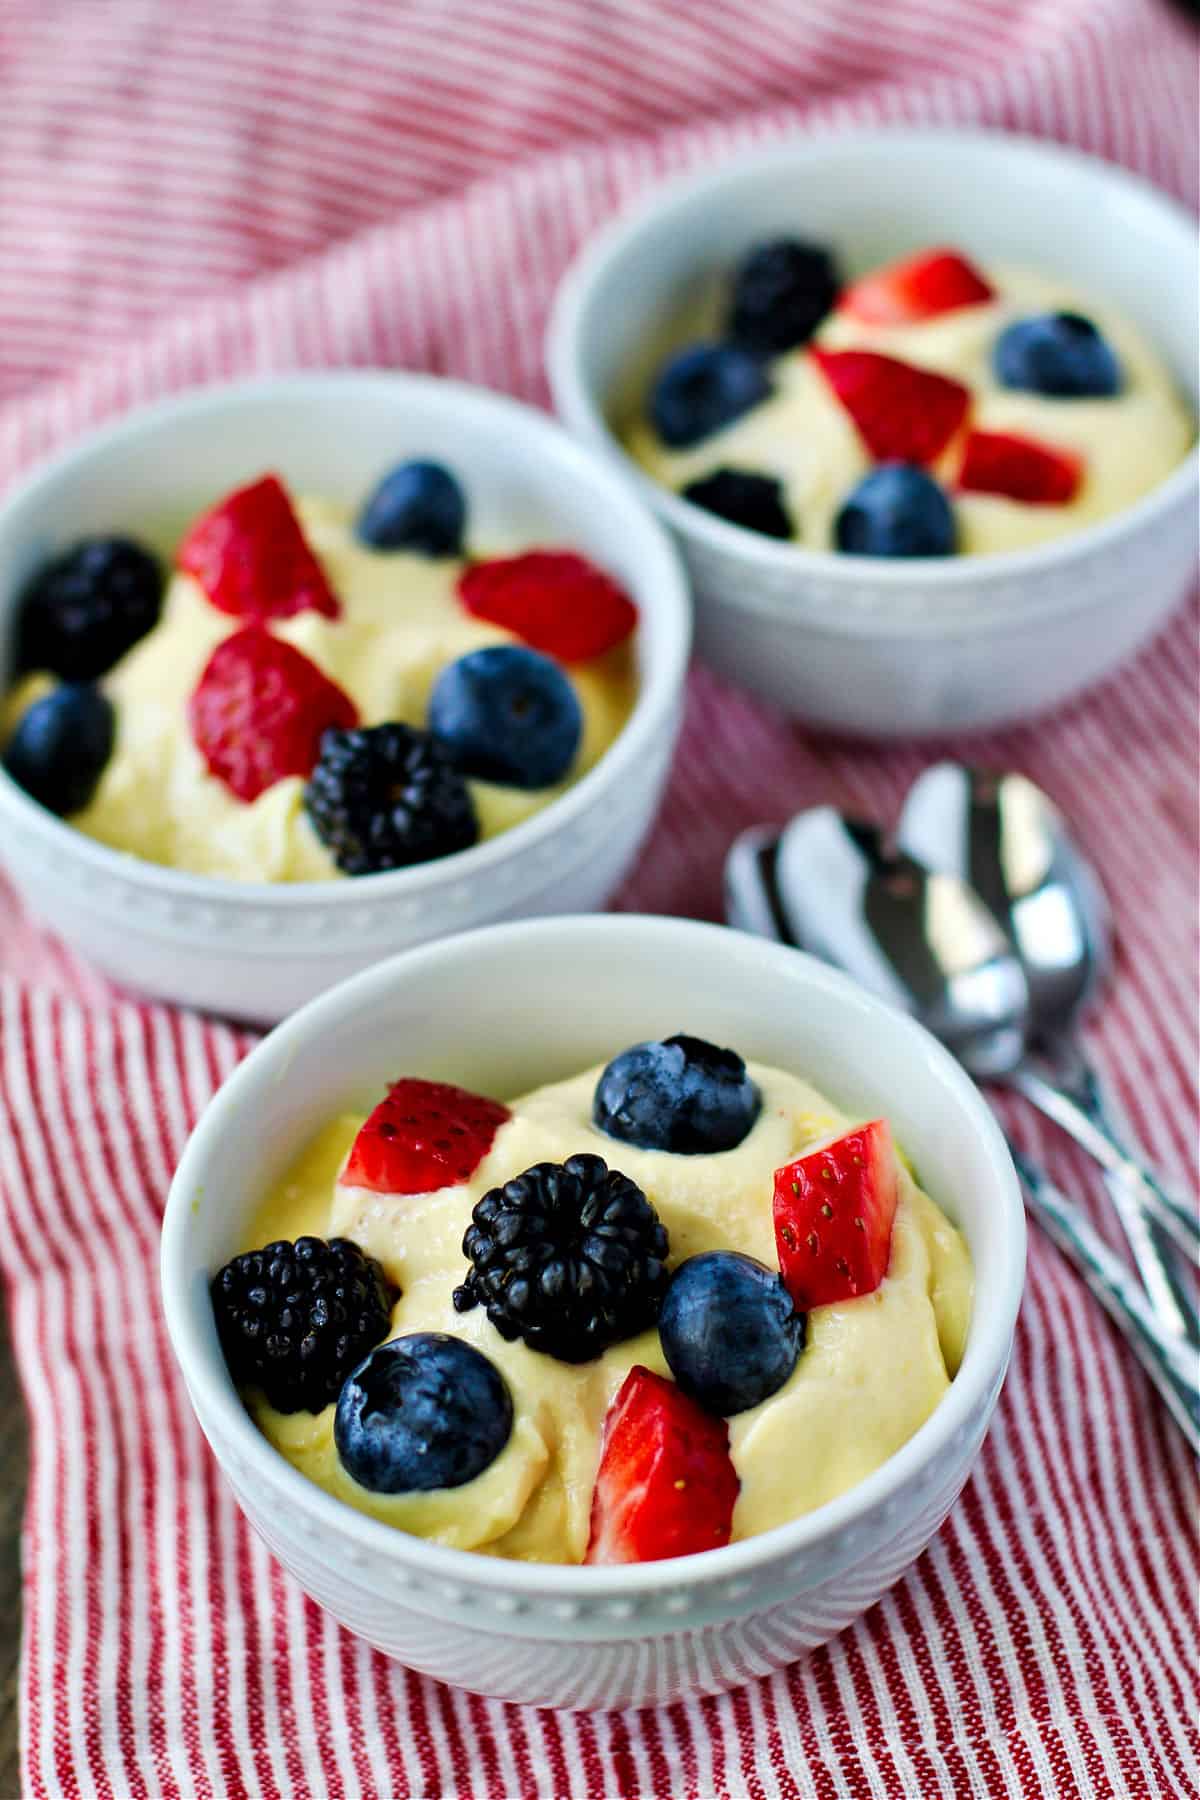 Mango Cream with Berries in a bowl.